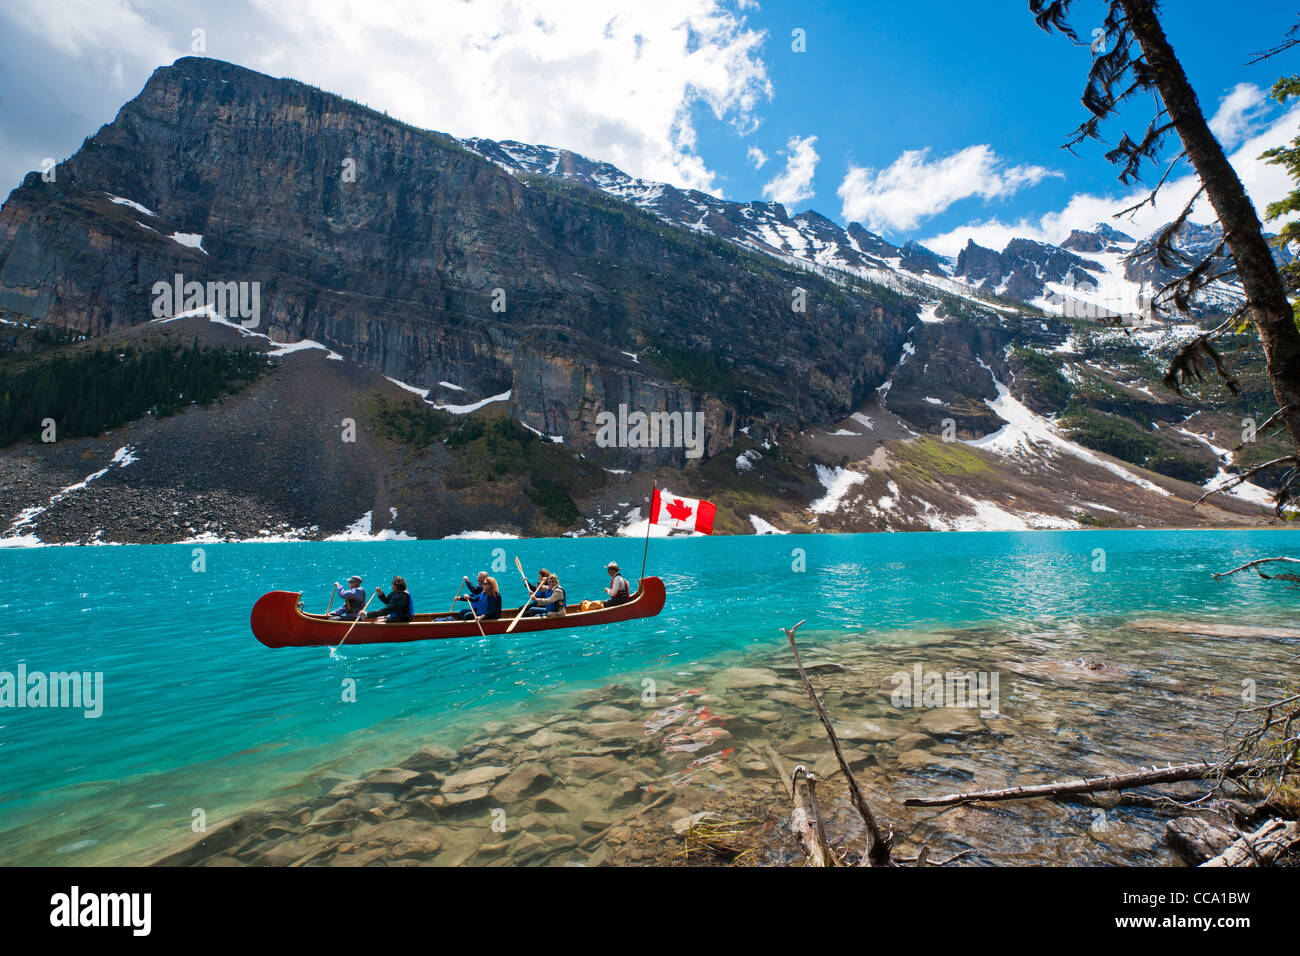 An expedition canoe on a tour of Lake Louise, Alberta, Canada. Stock Photo